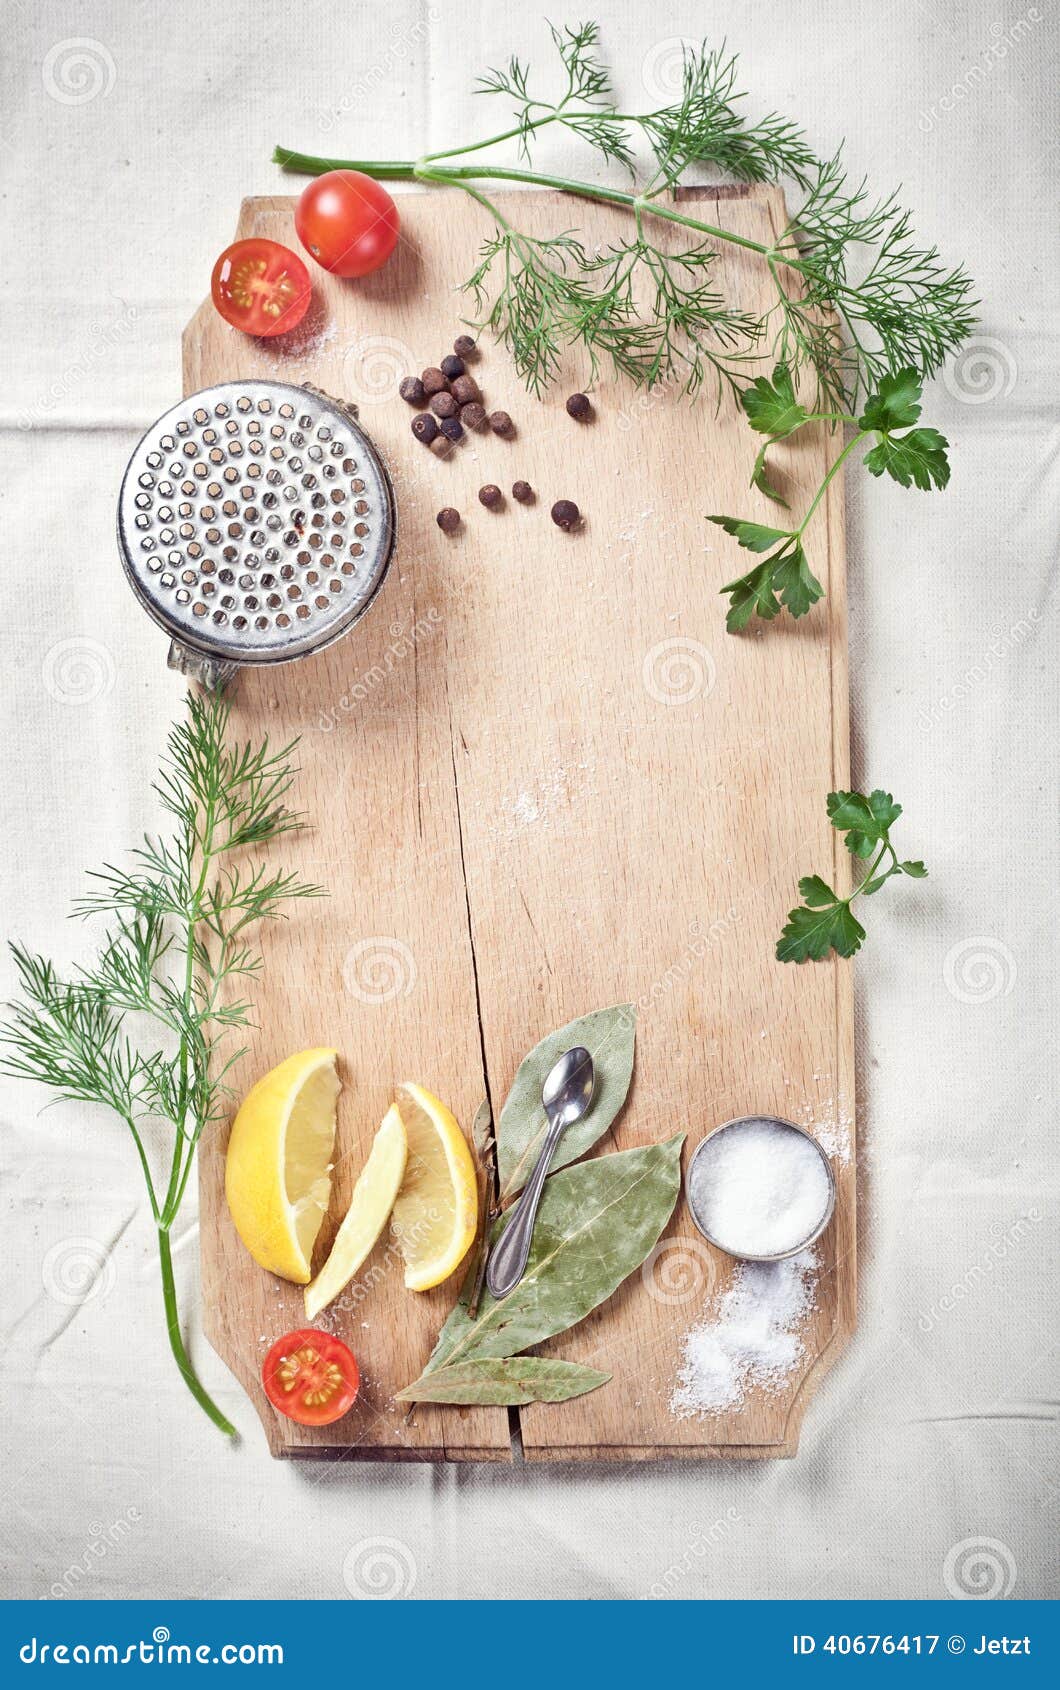 Kitchen Utensils, Spices and Herbs for Cooking Fish Stock Image - Image of  cutting, dill: 40676417